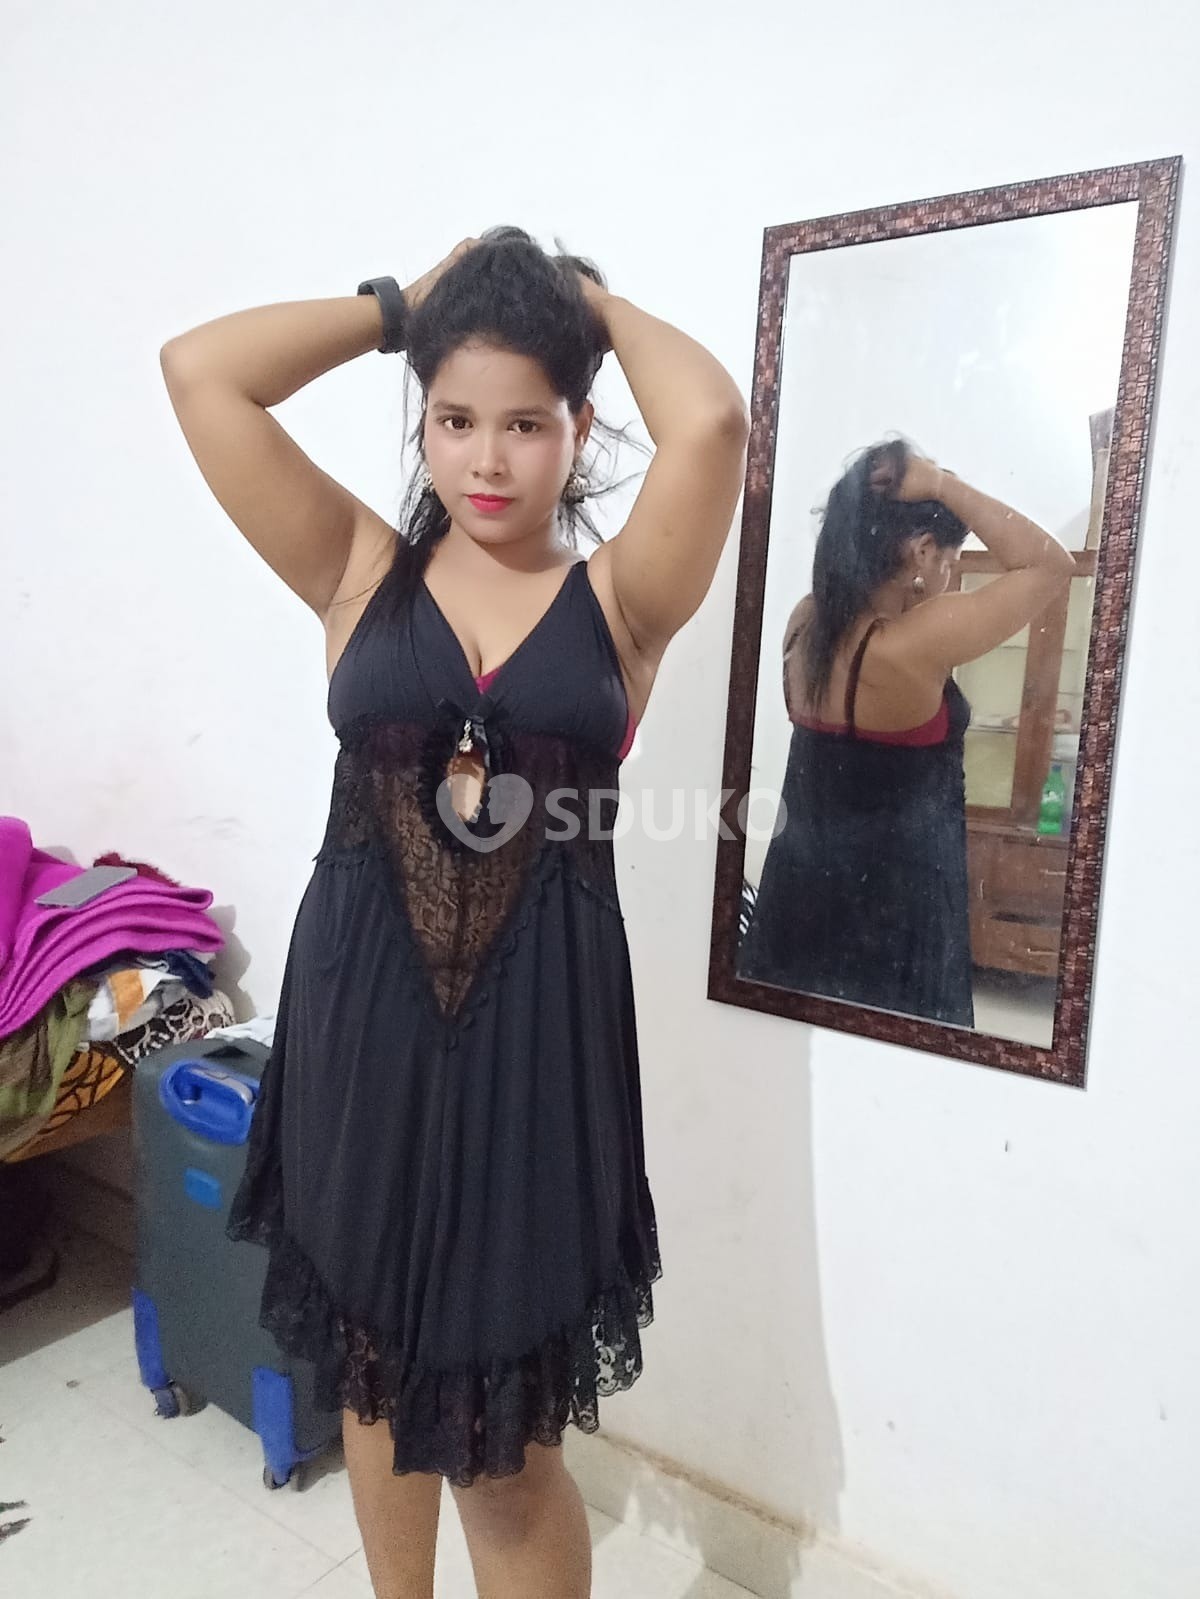 Cuttack 24 hours service available  100% SAFE AND SECURE TODAY LOW PRICE UNLIMITED ENJOY HOT COLLEGE GIRL HOUSEWIFE AUNT